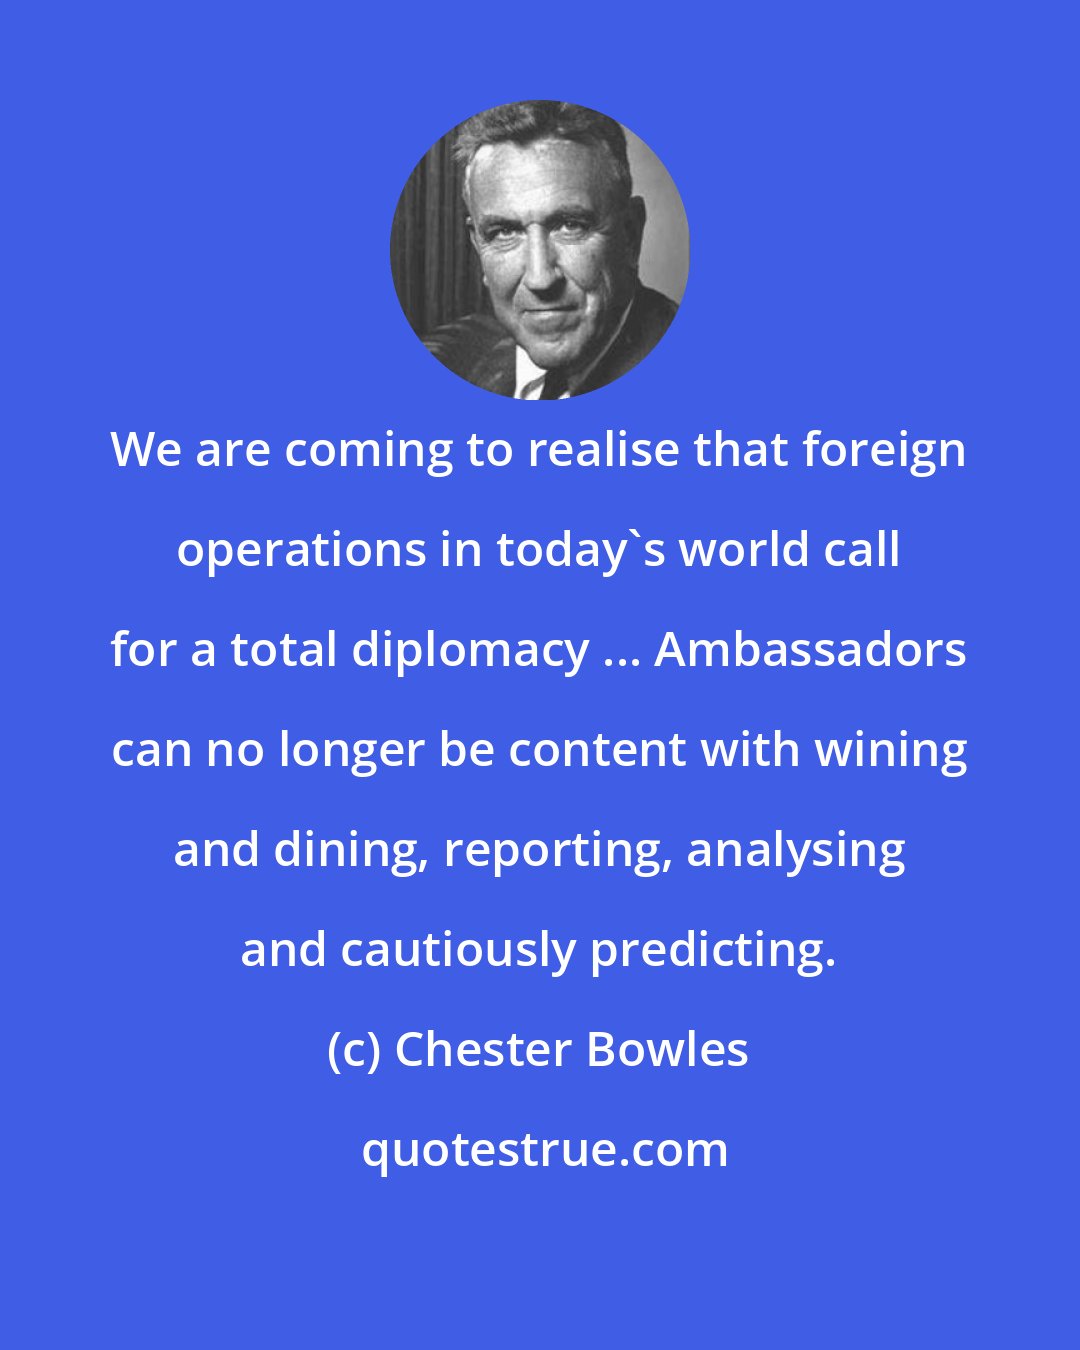 Chester Bowles: We are coming to realise that foreign operations in today's world call for a total diplomacy ... Ambassadors can no longer be content with wining and dining, reporting, analysing and cautiously predicting.